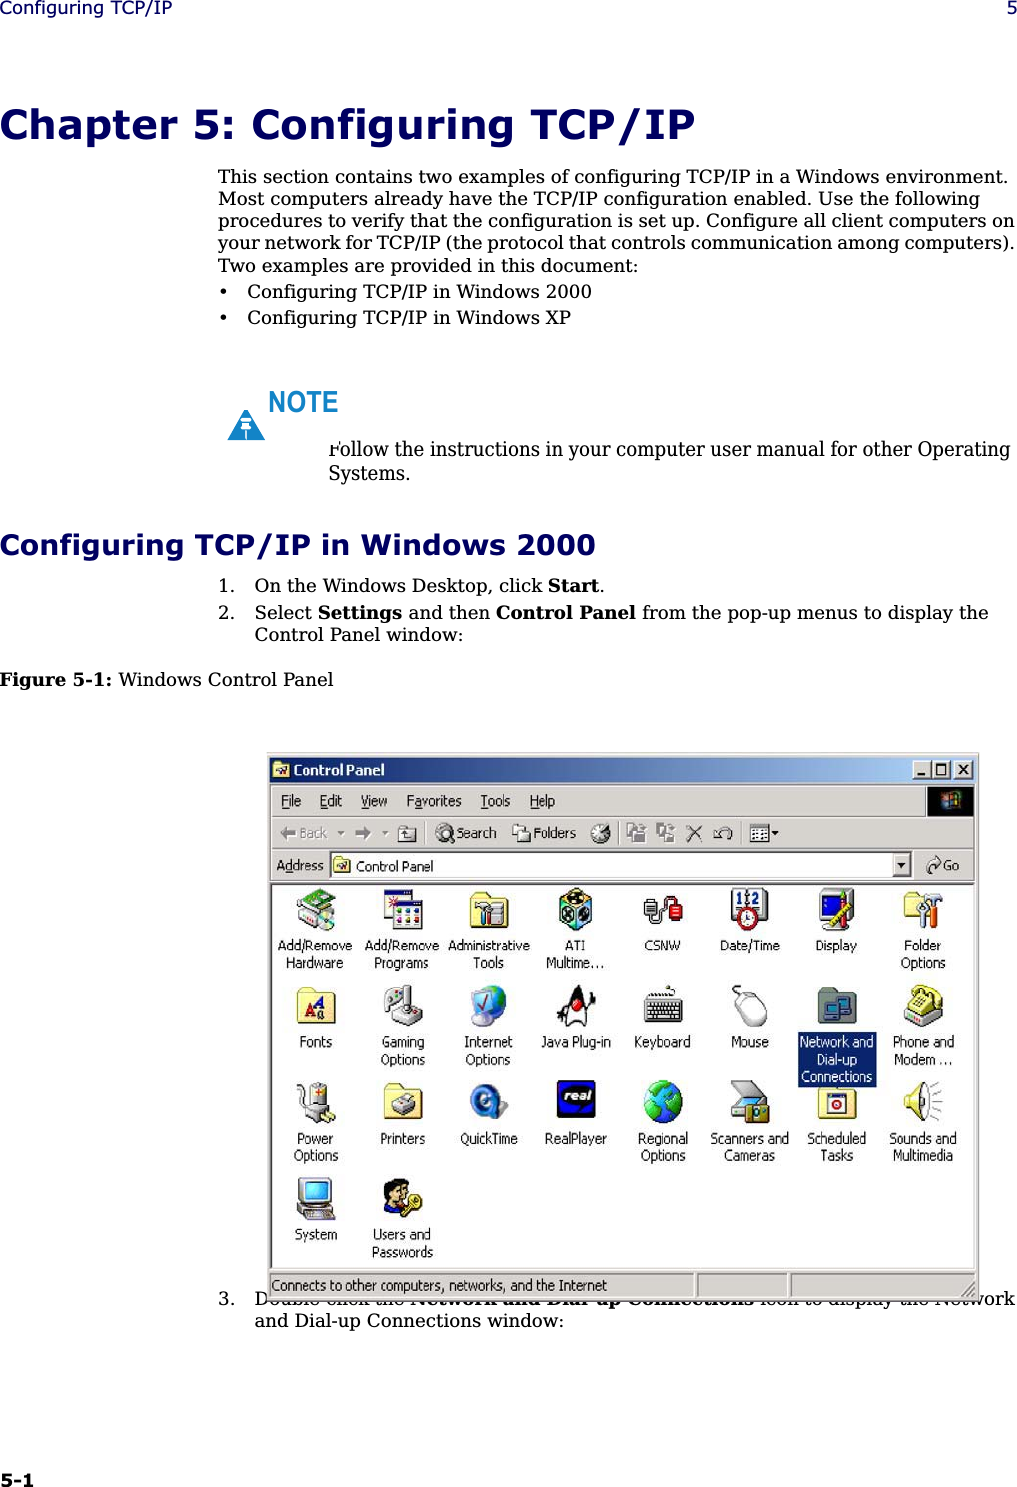 5-1Configuring TCP/IP 5Chapter 5: Configuring TCP/IPThis section contains two examples of configuring TCP/IP in a Windows environment. Most computers already have the TCP/IP configuration enabled. Use the following procedures to verify that the configuration is set up. Configure all client computers on your network for TCP/IP (the protocol that controls communication among computers). Two examples are provided in this document:• Configuring TCP/IP in Windows 2000• Configuring TCP/IP in Windows XP Configuring TCP/IP in Windows 20001. On the Windows Desktop, click Start.2. Select Settings and then Control Panel from the pop-up menus to display the Control Panel window:Figure 5-1: Windows Control Panel3. Double-click the Network and Dial-up Connections icon to display the Network and Dial-up Connections window:Follow the instructions in your computer user manual for other Operating Systems.NOTE